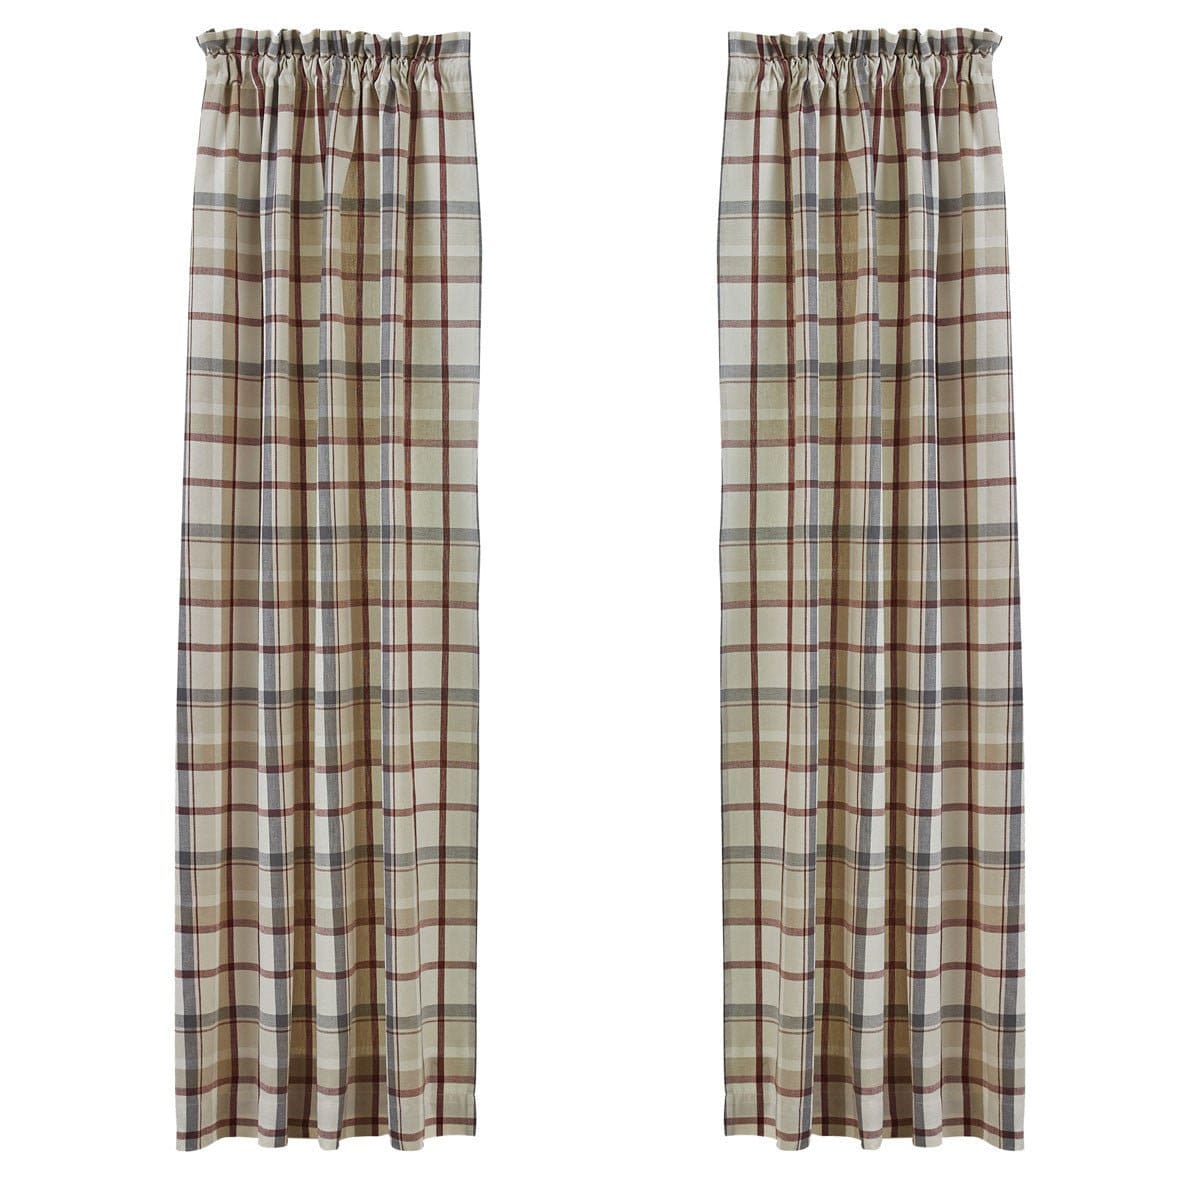 Glenwood Panel Pair With Tie Backs 84" Long Lined-Park Designs-The Village Merchant